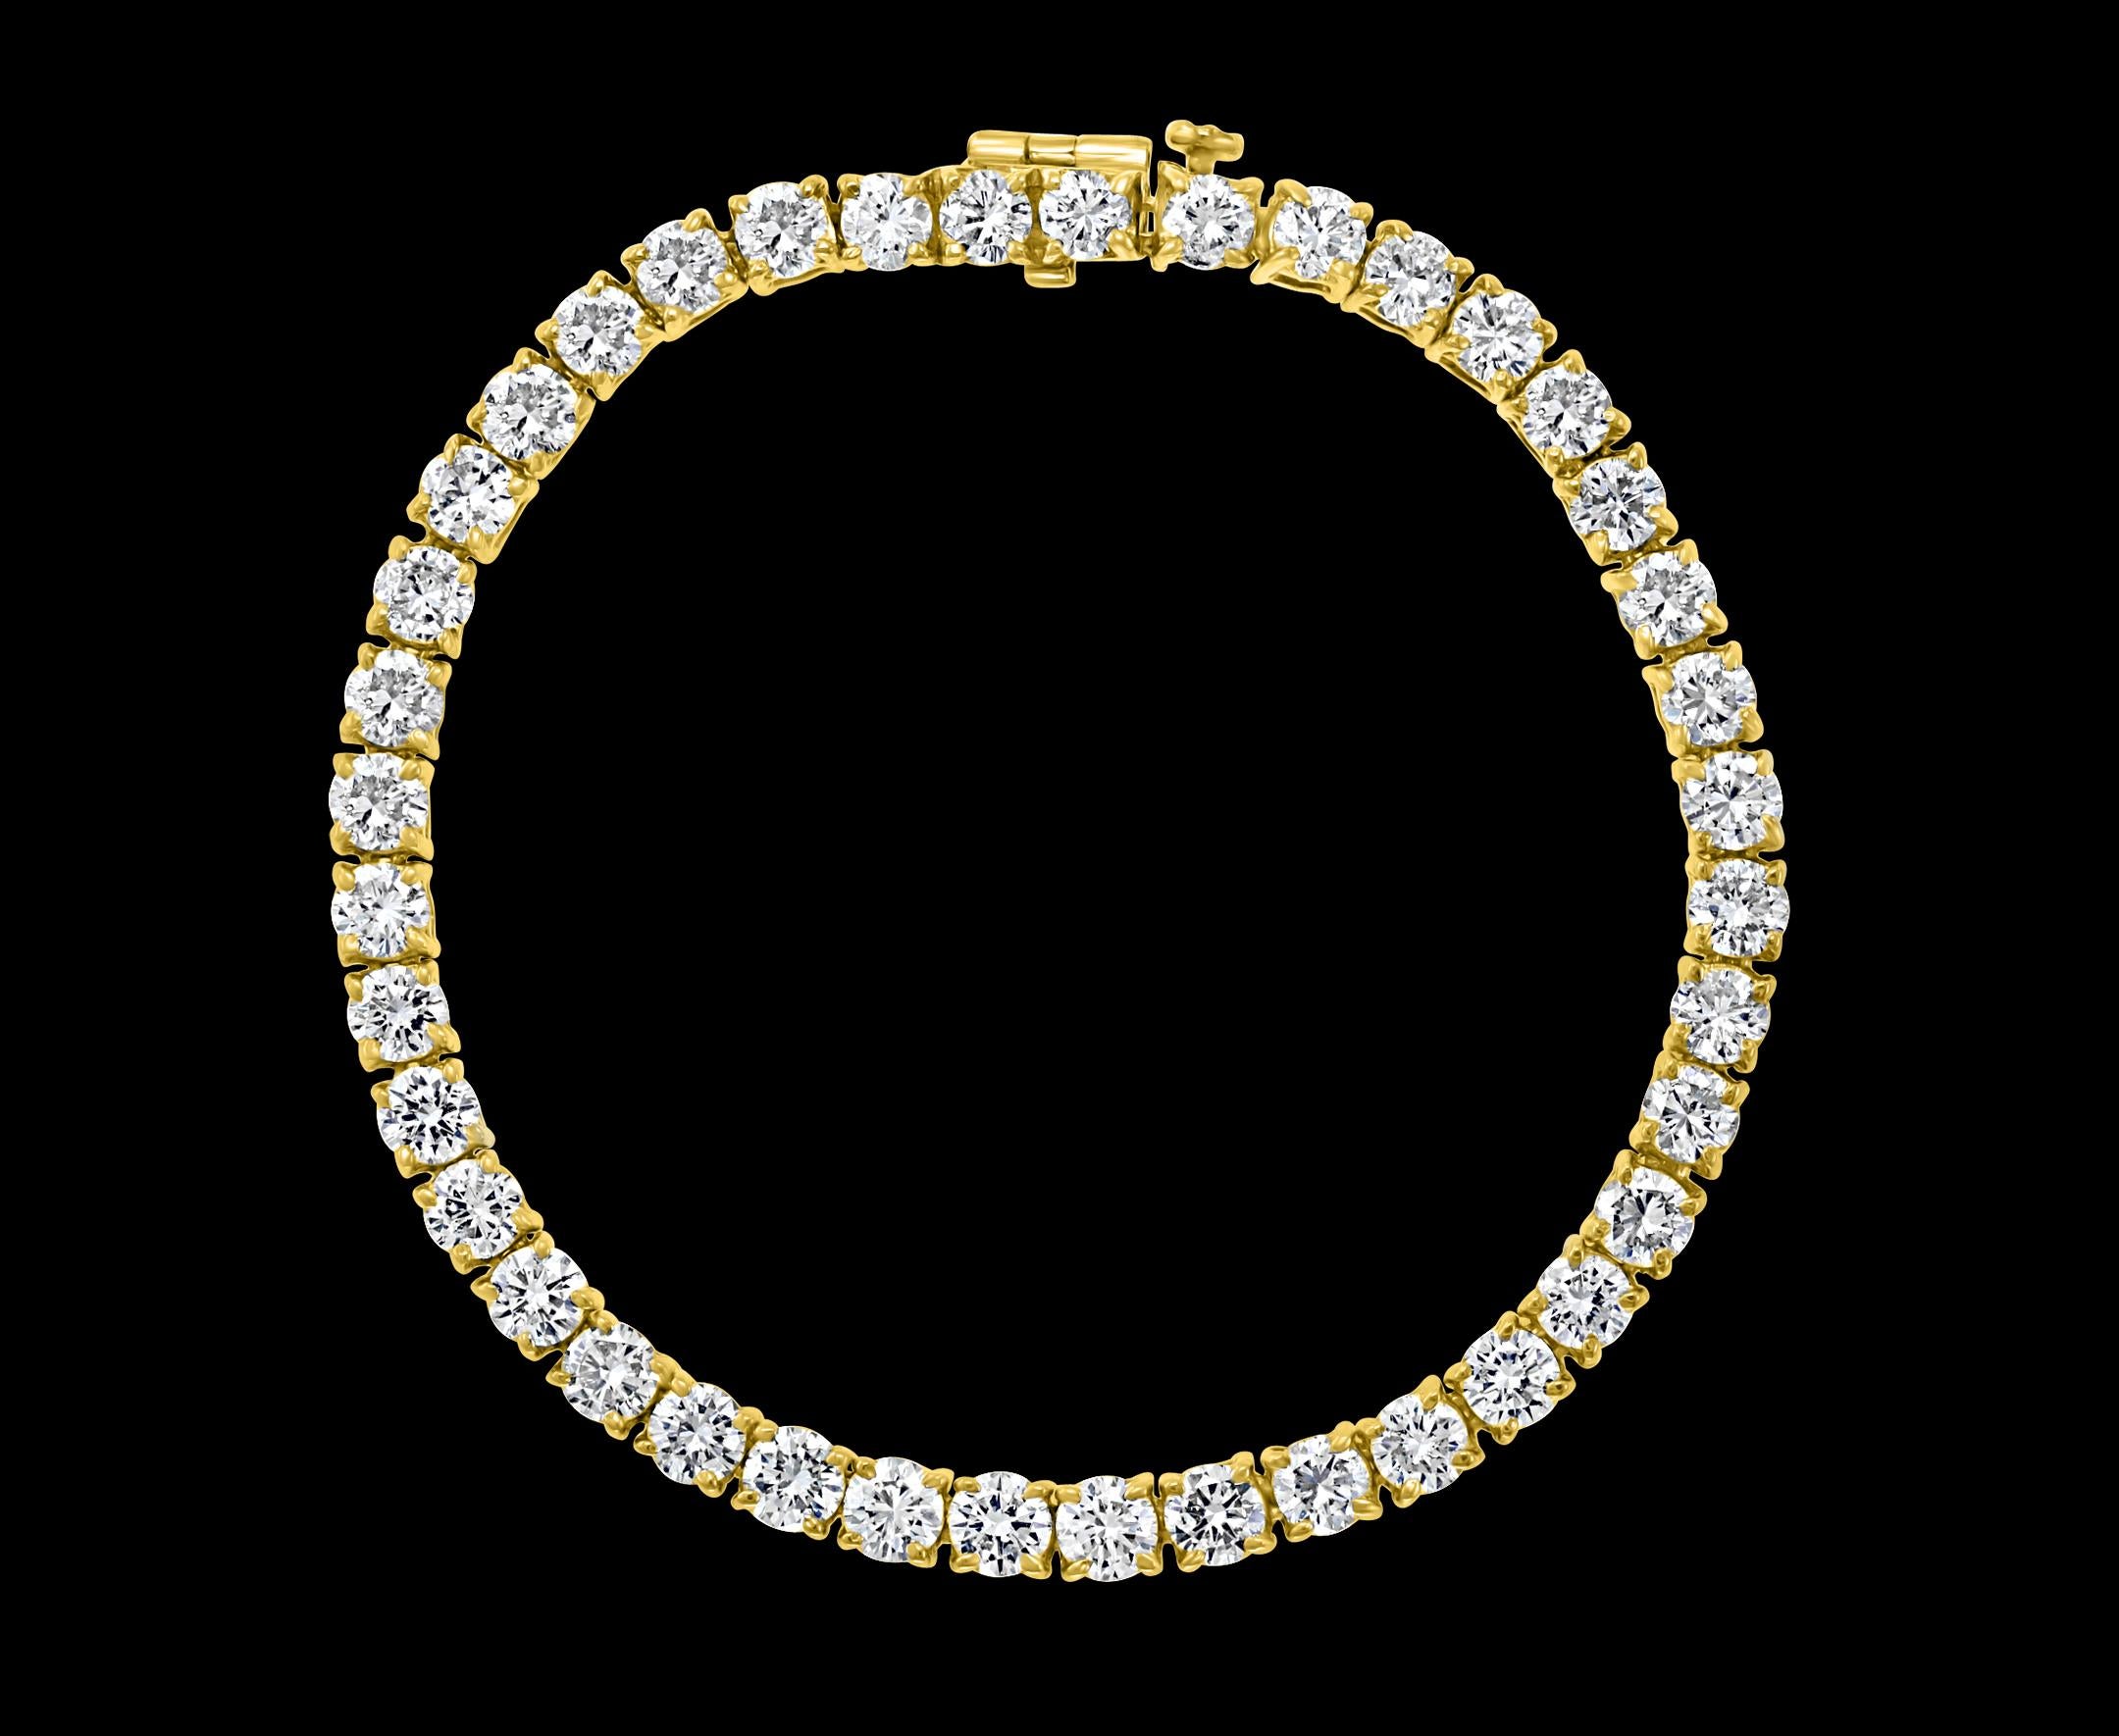 
40 Round Diamond 25 Pointer Each Tennis Bracelet in 18 K Yellow Gold 10 Ct Line Bracelet
Meet the ultimate bold tennis bracelet. The single row of prong set Round Brilliant cut Diamonds.
25 pointer each , 40 Total pieces approximately 10 Ct
Very